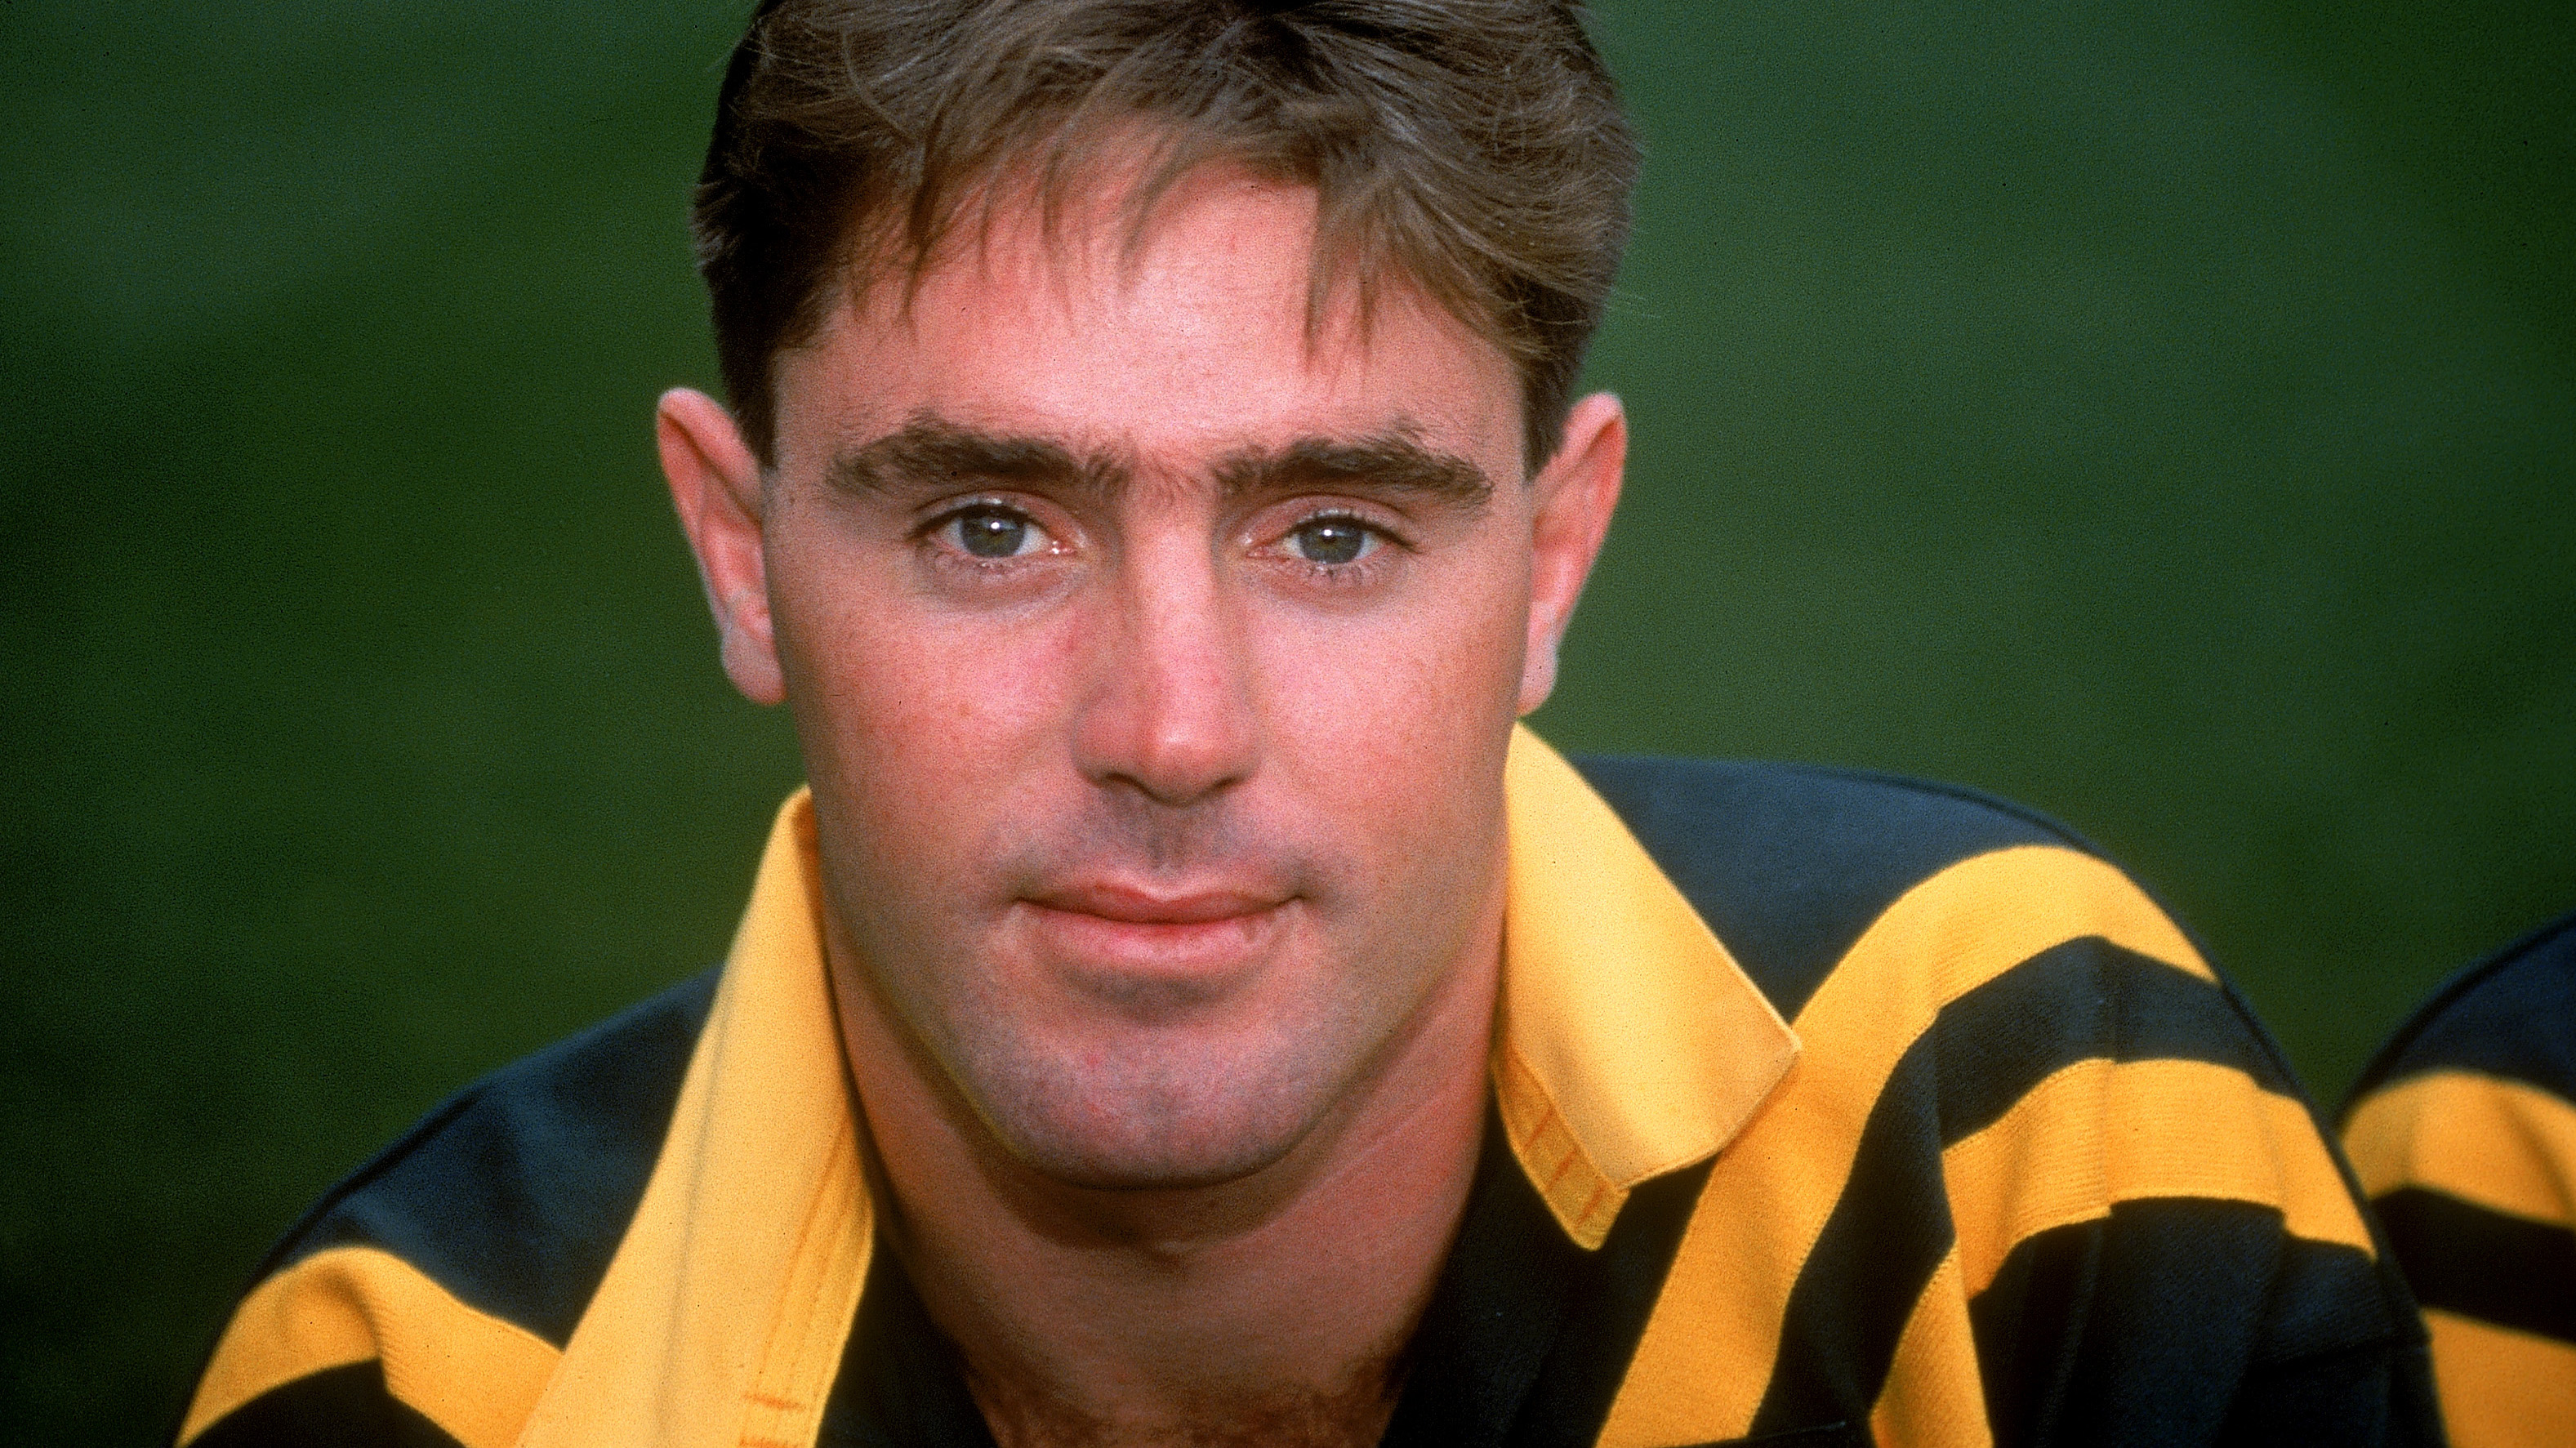 1994: Brad Fittler of the Kangaroos poses for a photo during the Australian Kangaroos Rugby League photocall for the upcoming tour of Great Britain held in England. (Photo by Clive Brunskill/Getty Images)